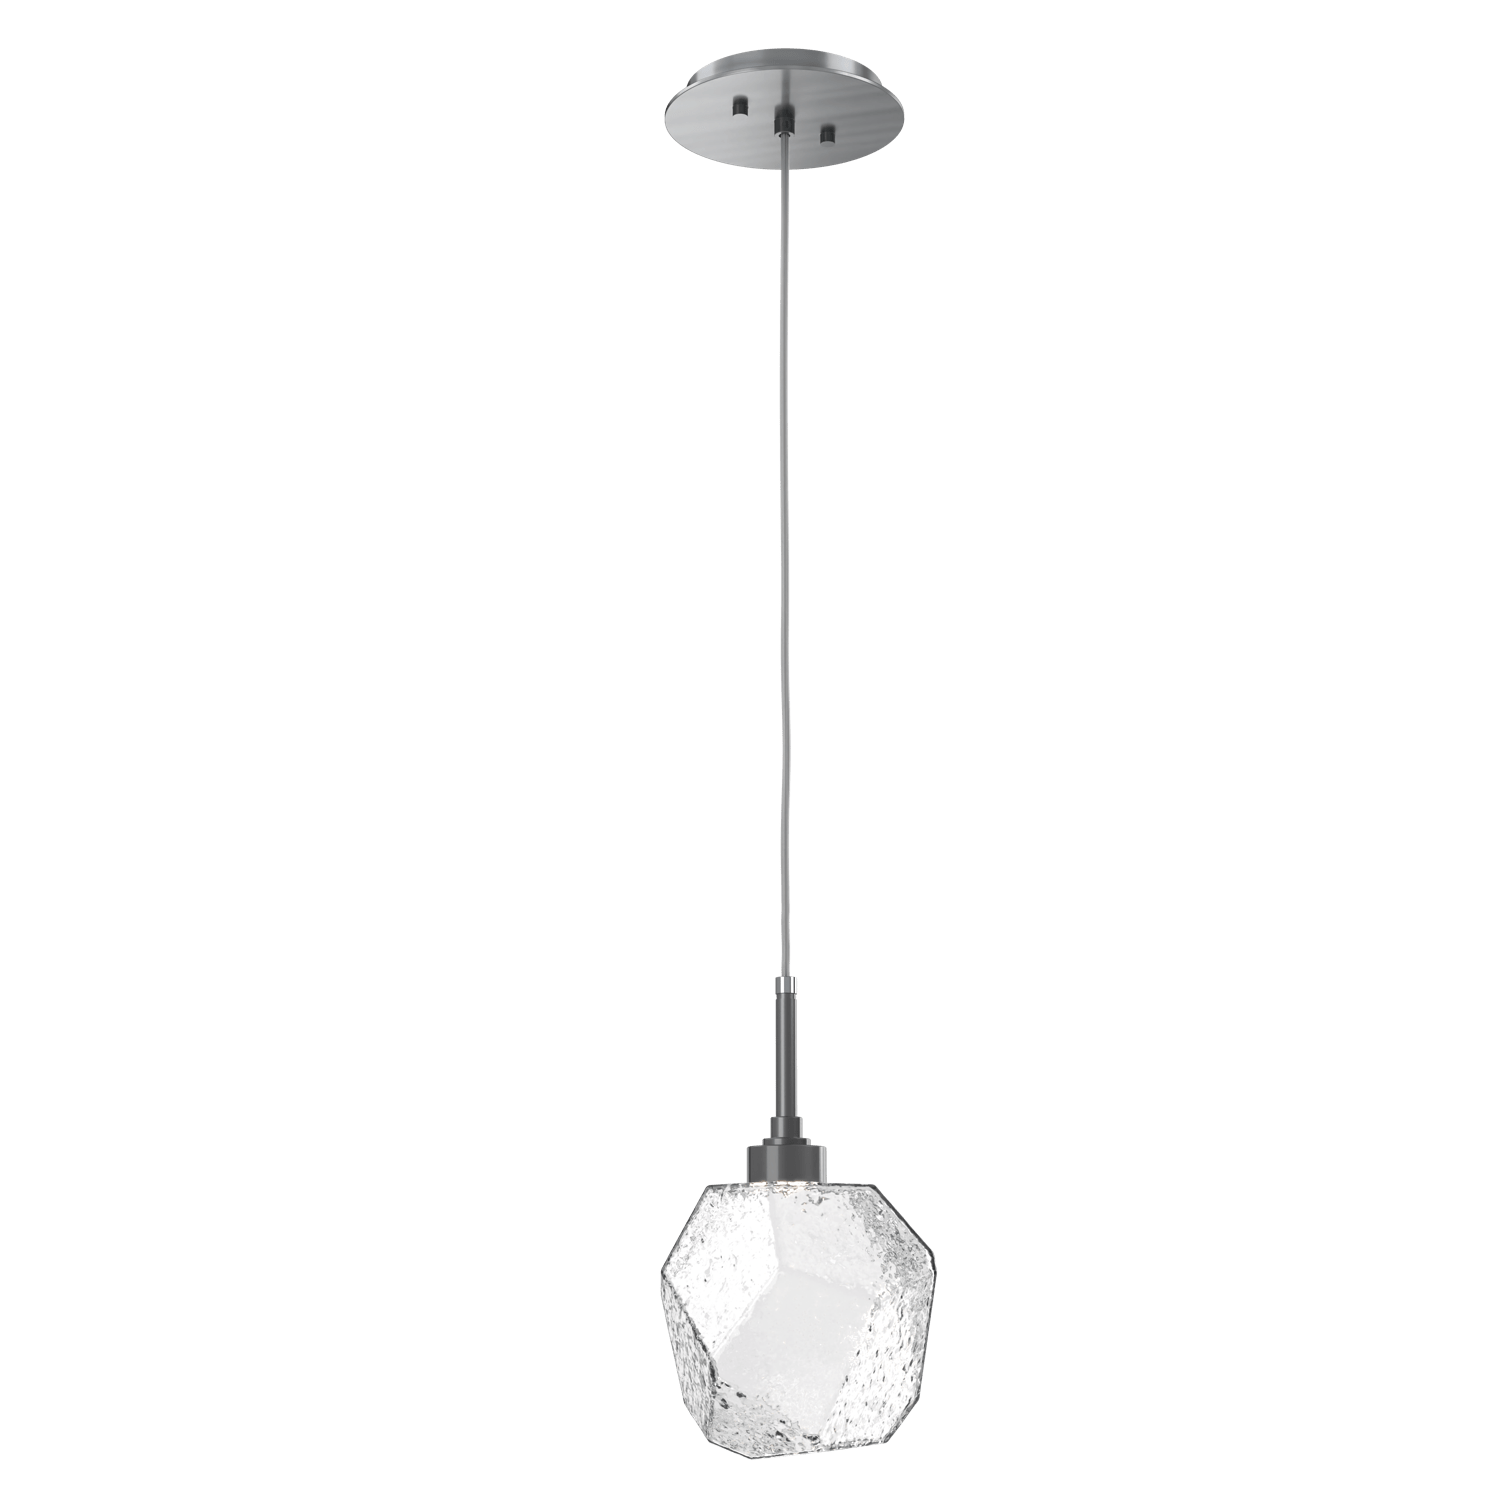 LAB0039-01-GM-C-Hammerton-Studio-Gem-pendant-light-with-gunmetal-finish-and-clear-blown-glass-shades-and-LED-lamping